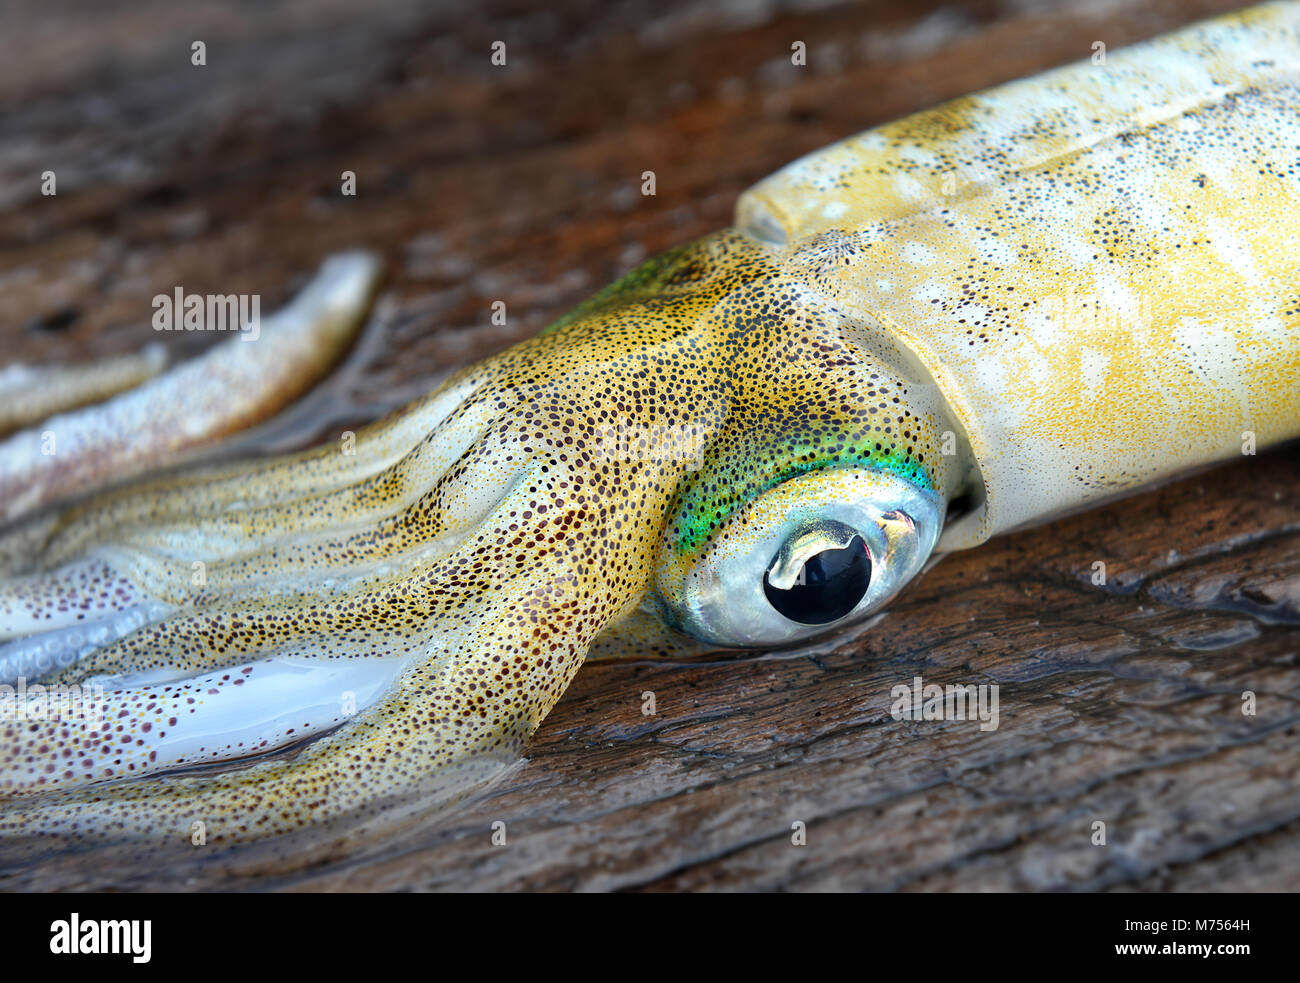 Eye focusing of Fresh and life soft cuttle fish from fishery market in Thailand photo in outdoor cloudy lighting. Stock Photo